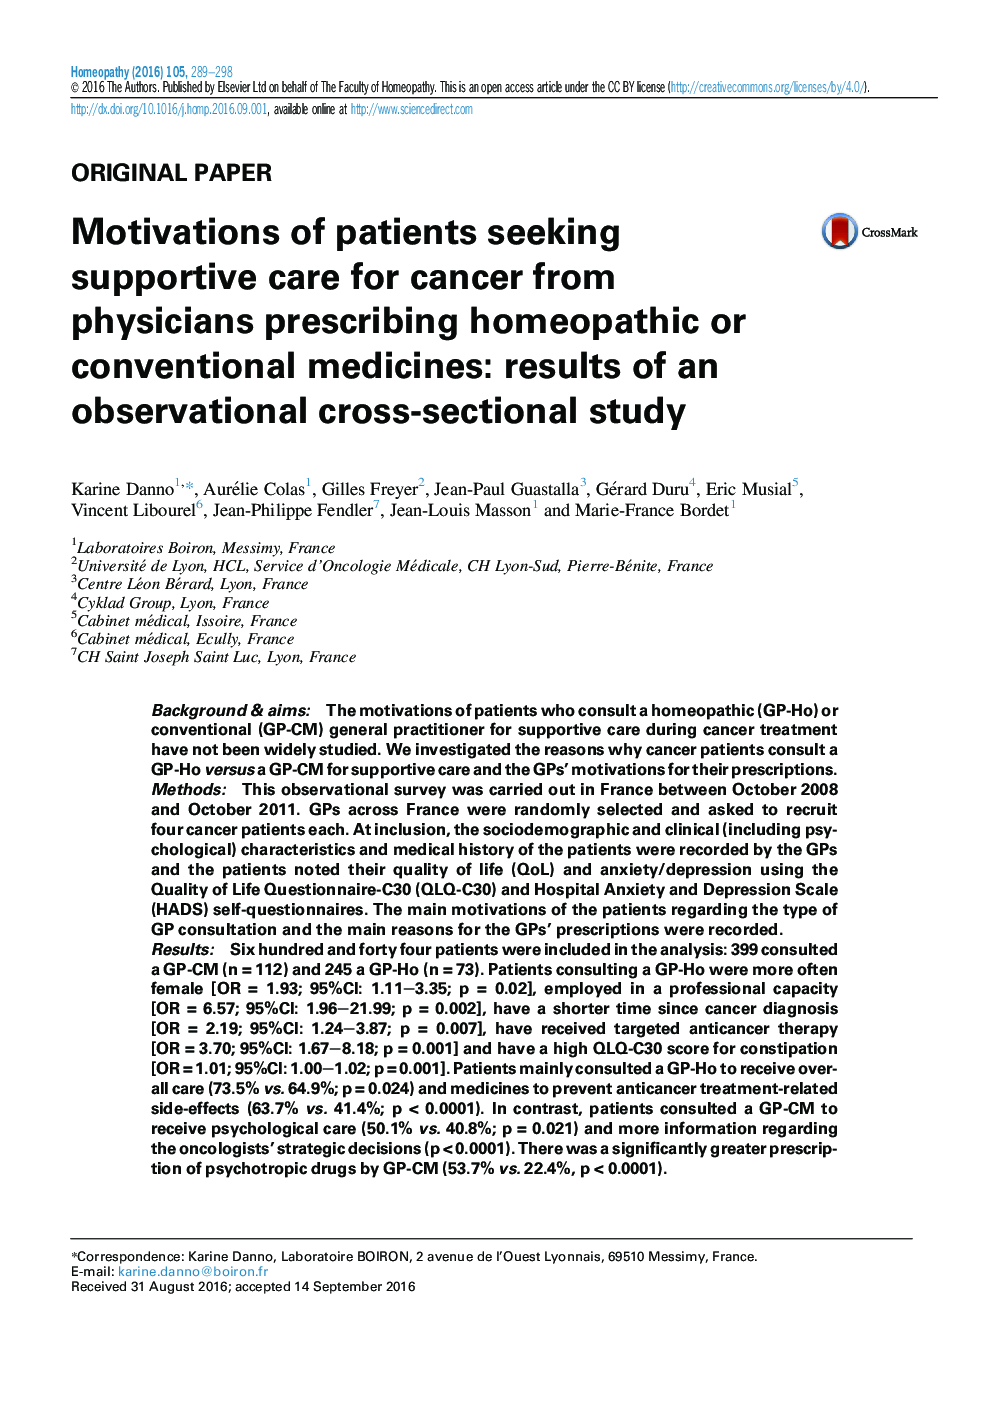 Motivations of patients seeking supportive care for cancer from physiciansÂ prescribing homeopathic or conventional medicines: results of an observational cross-sectional study